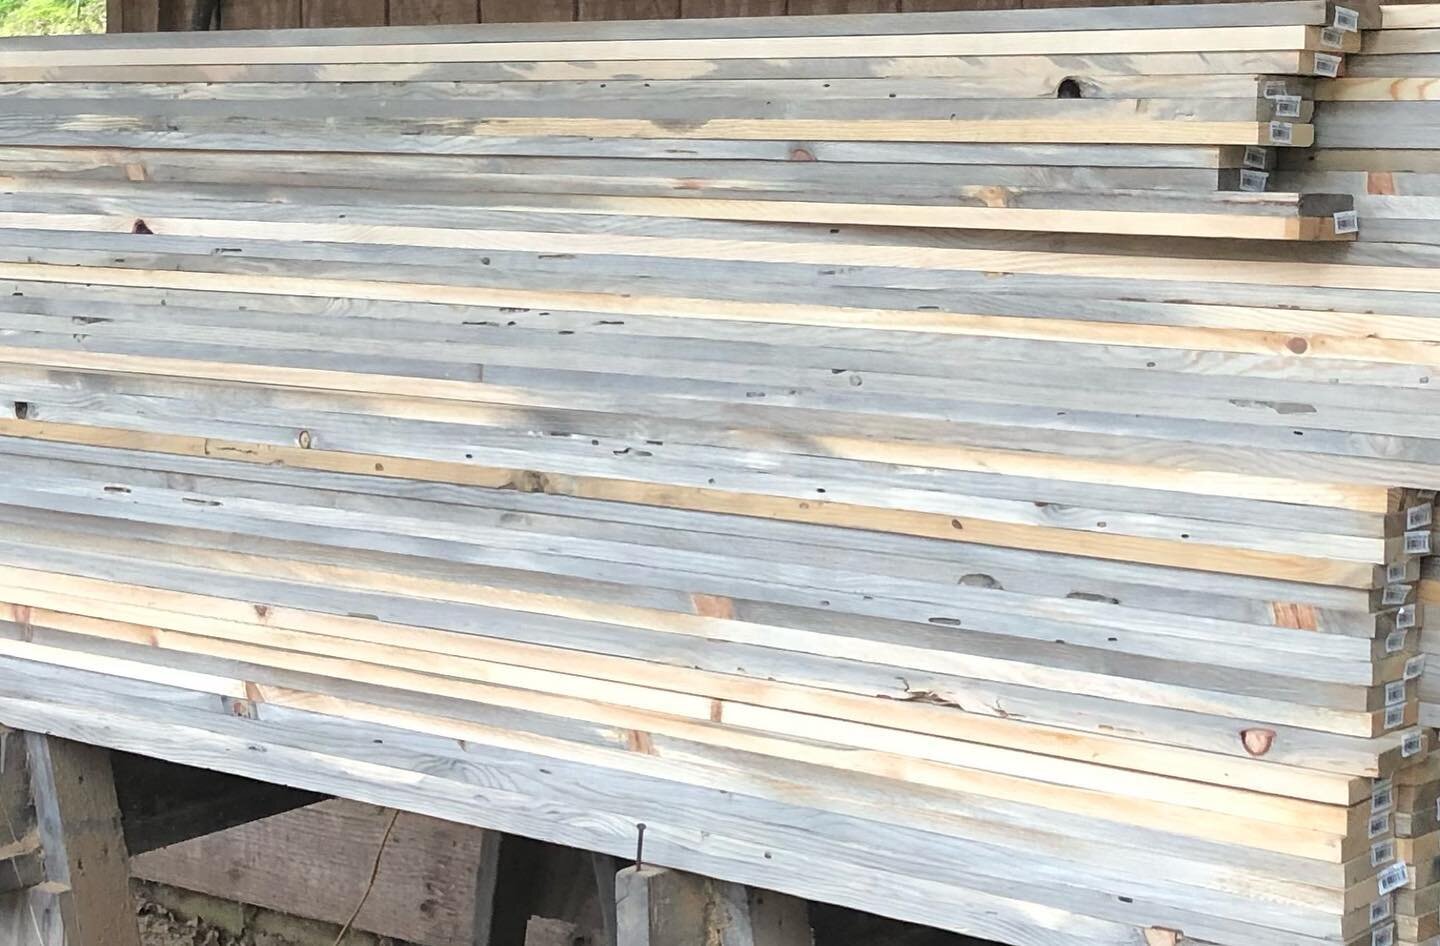 What have we been up to? Working on a big order of blue, ponderosa pine signs! 500 almost ready to go out. We will be offering these in our store soon. They wood burn very well. Let us know if you like them or not. 

#rusticwoodsupply #newproduct #ne